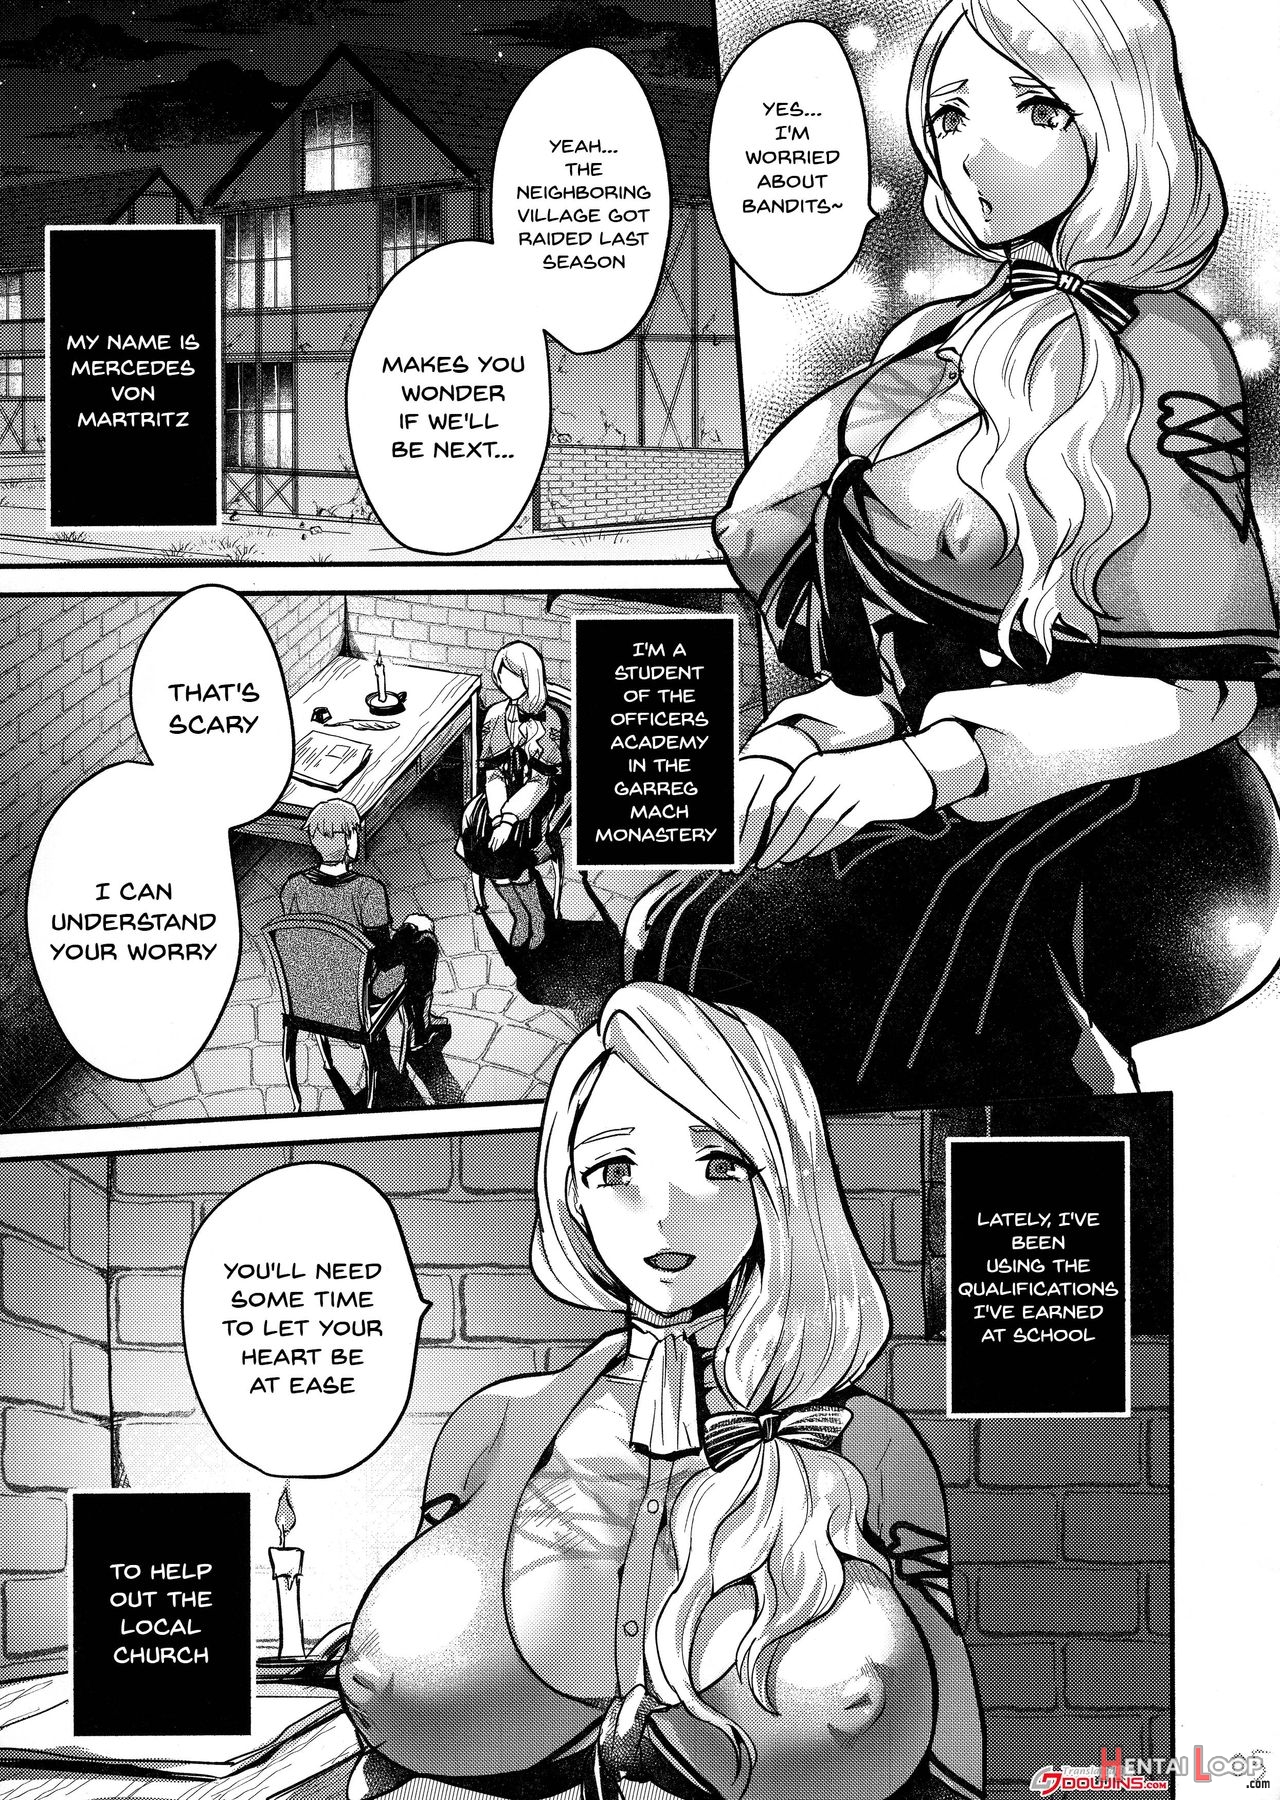 The Pleasure Of Service page 4